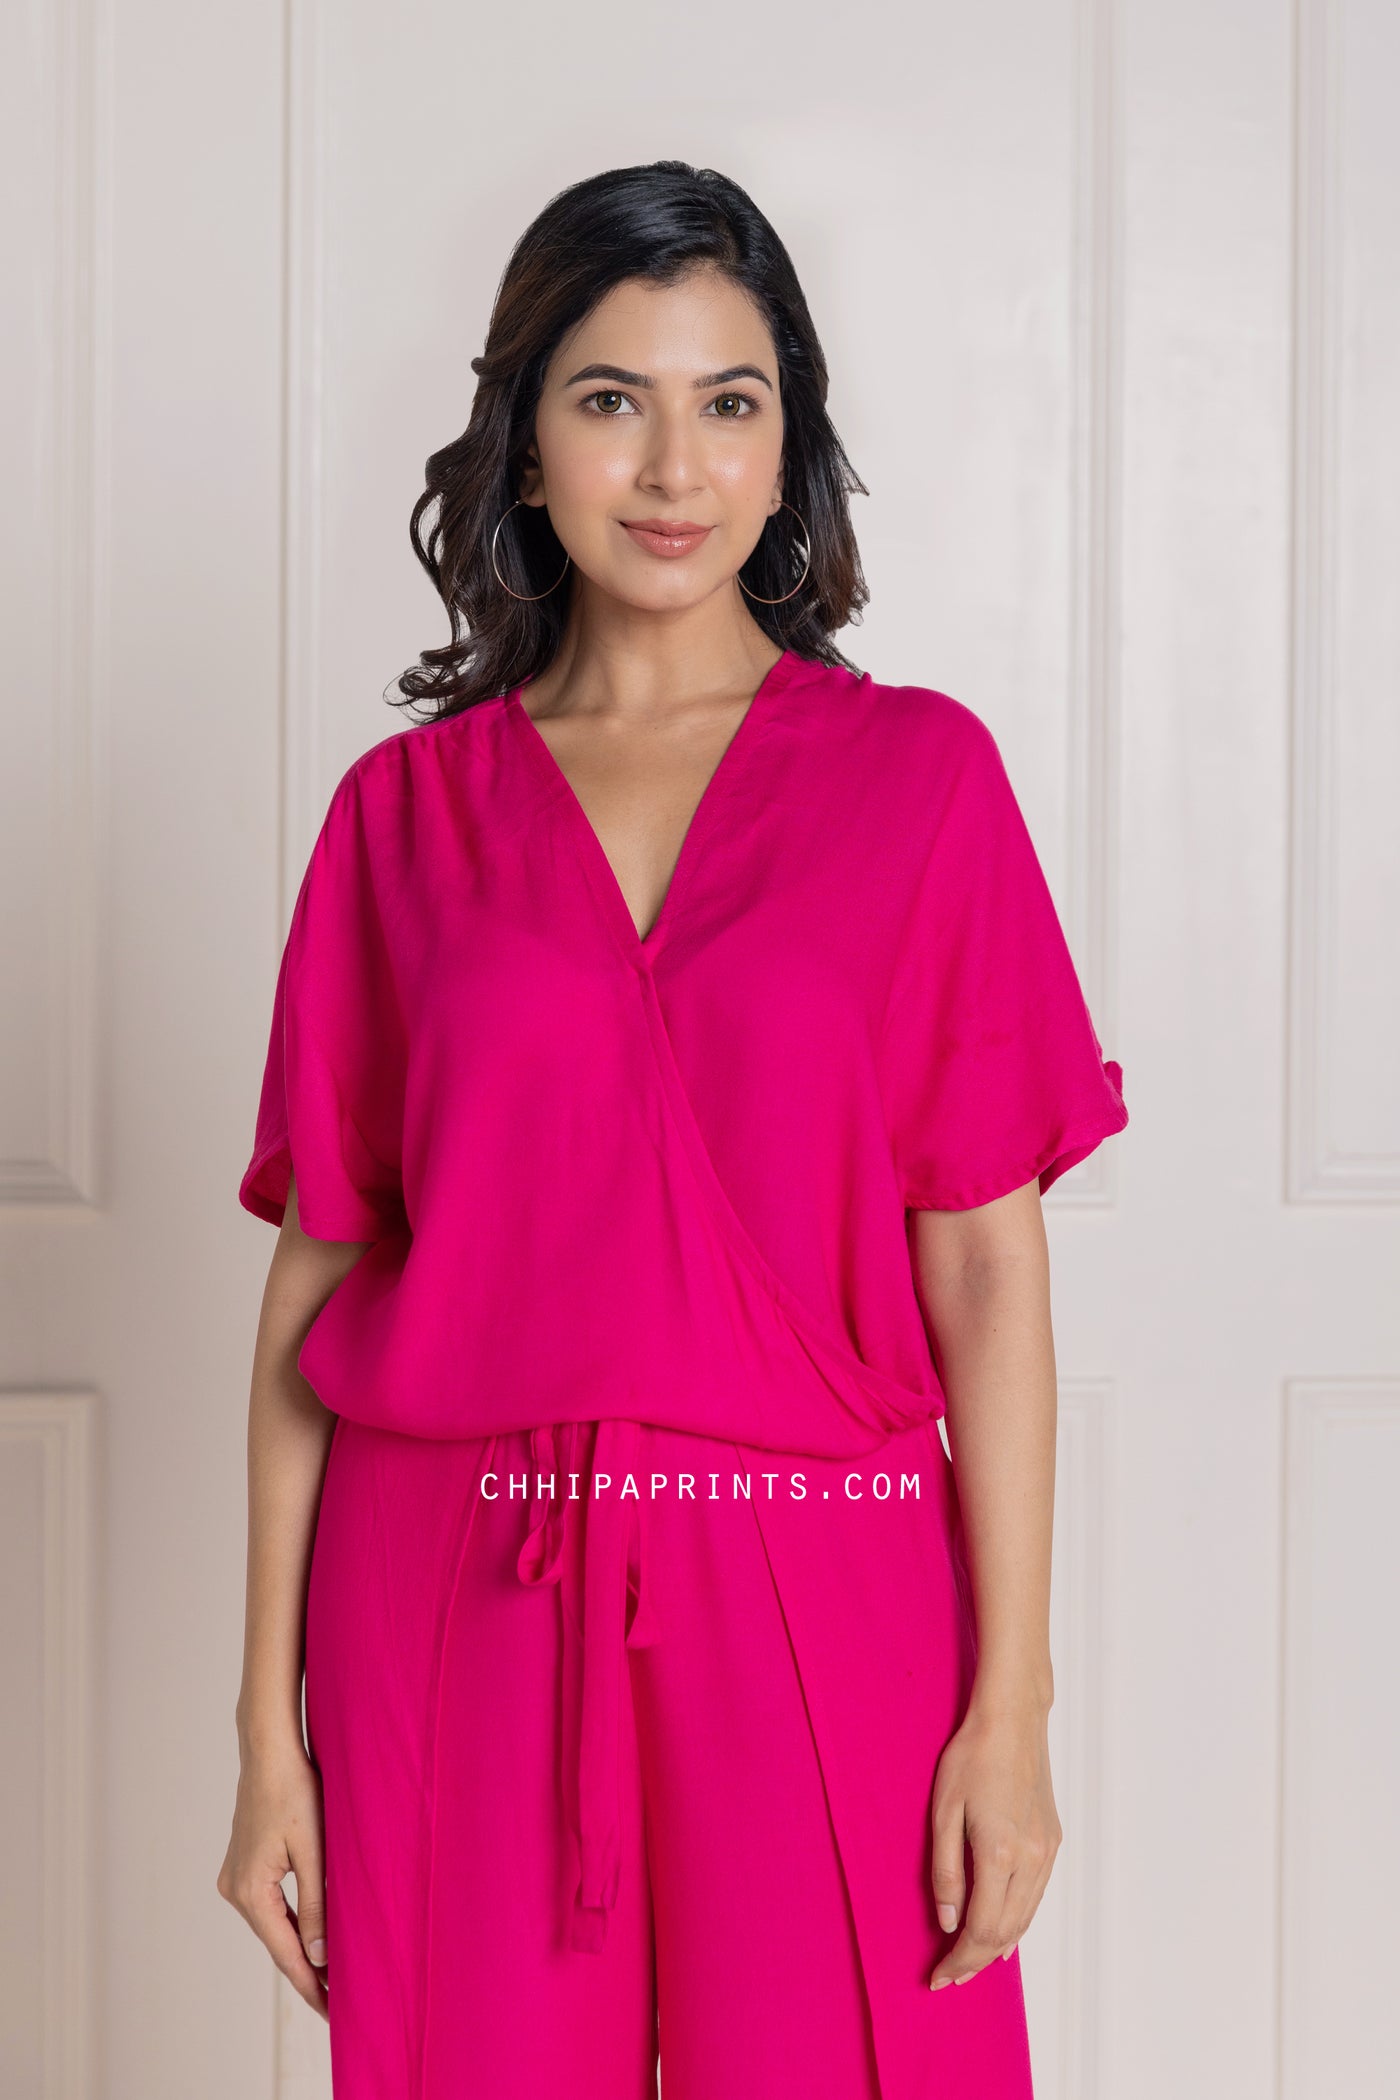 Cotton Modal Wrap Top and Pants Co Ord Set in Solid Shades of Hot Pink